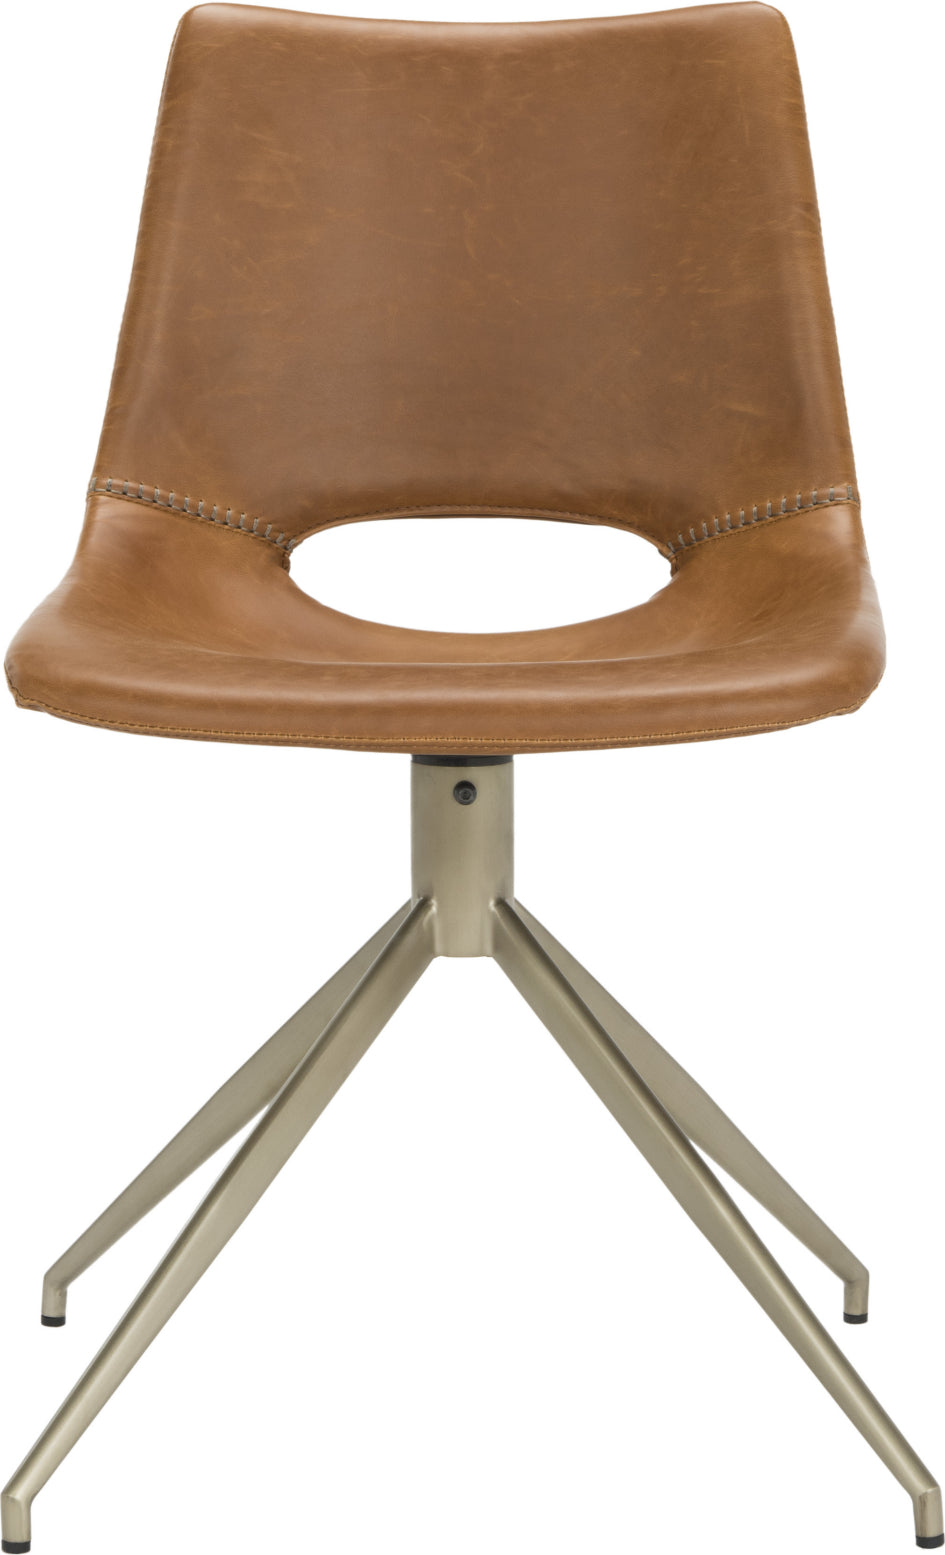 Safavieh Danube Midcentury Modern Leather Swivel Dining Chair Light Brown and Brass Furniture main image